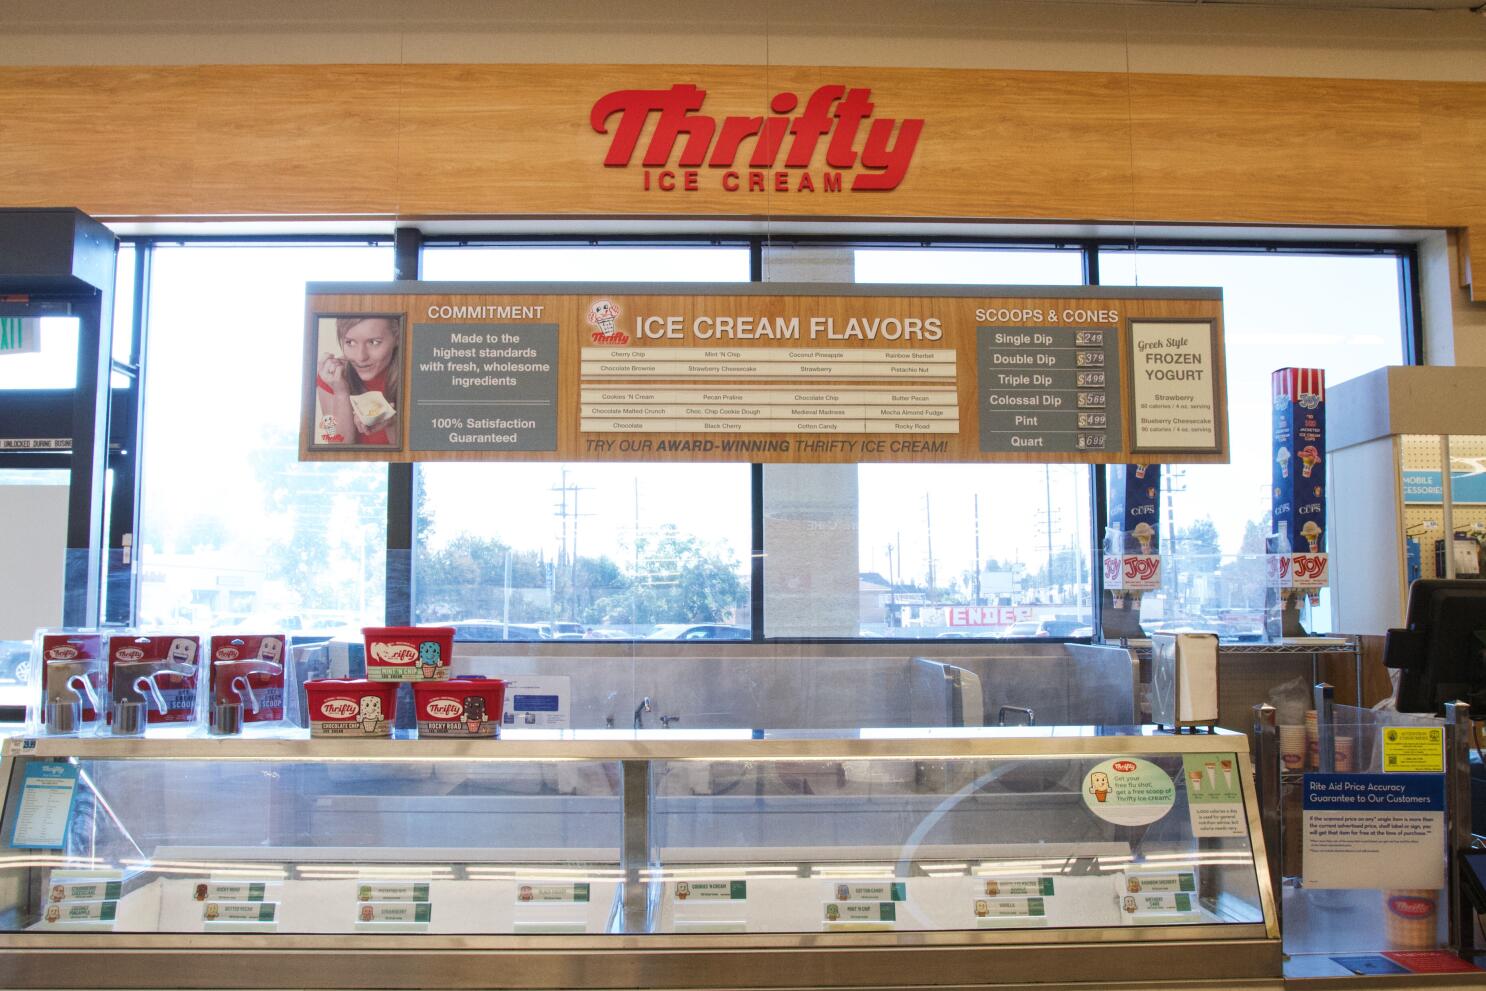 Rite Aid - What's cooler than cool? Thrifty Ice Cream! 😉